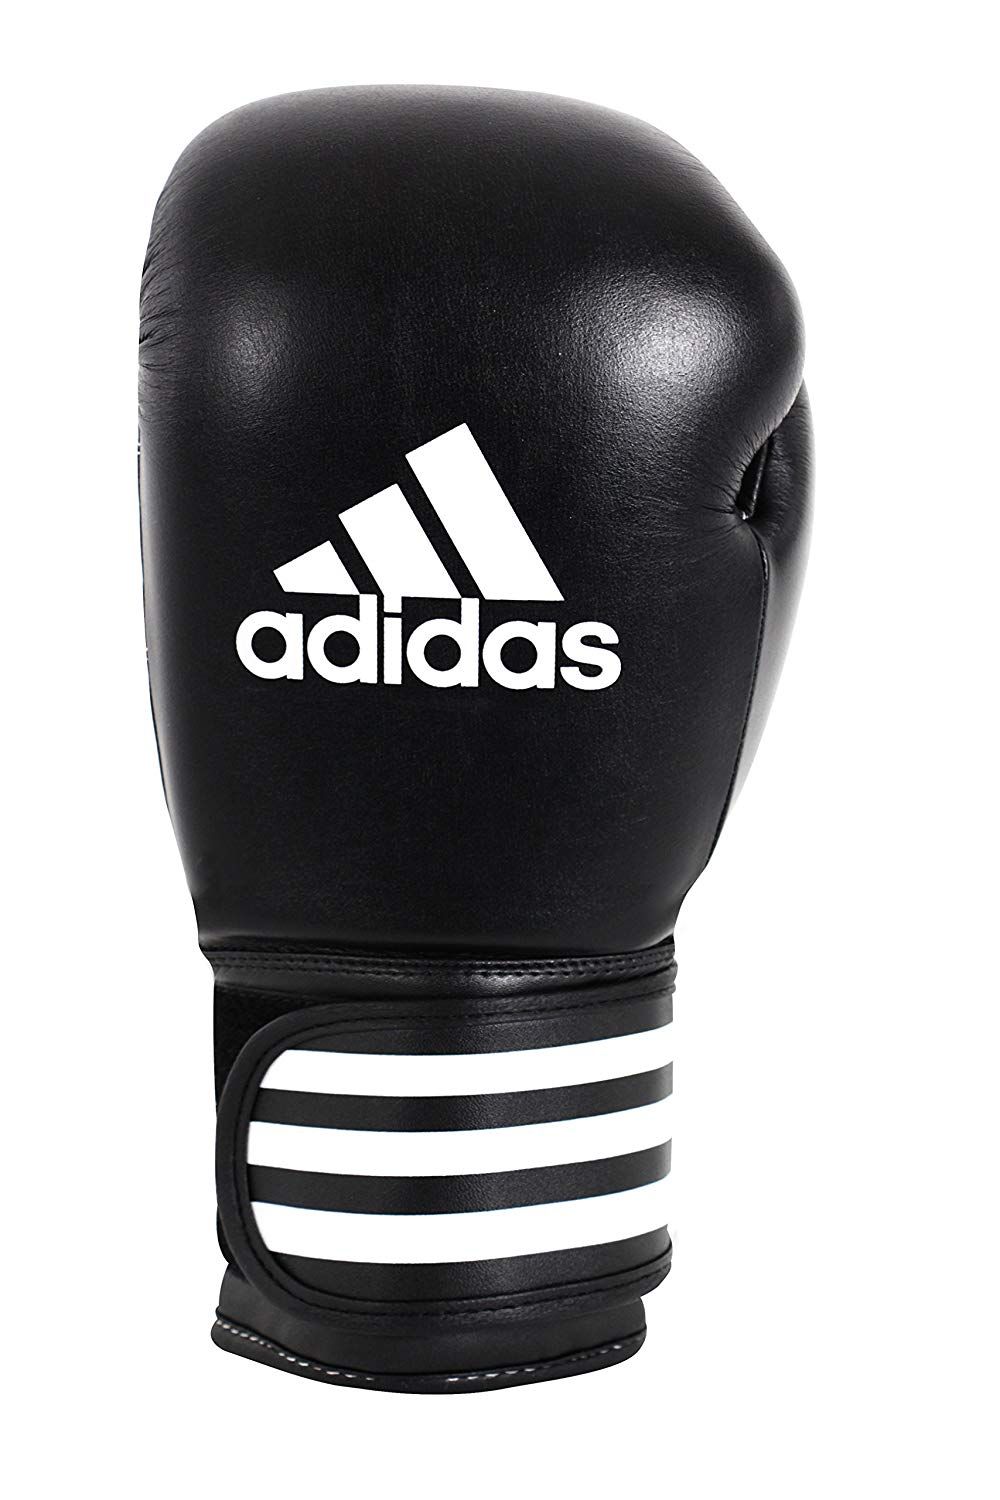 Adidas Boxing Alley Boxing Performer Gloves -